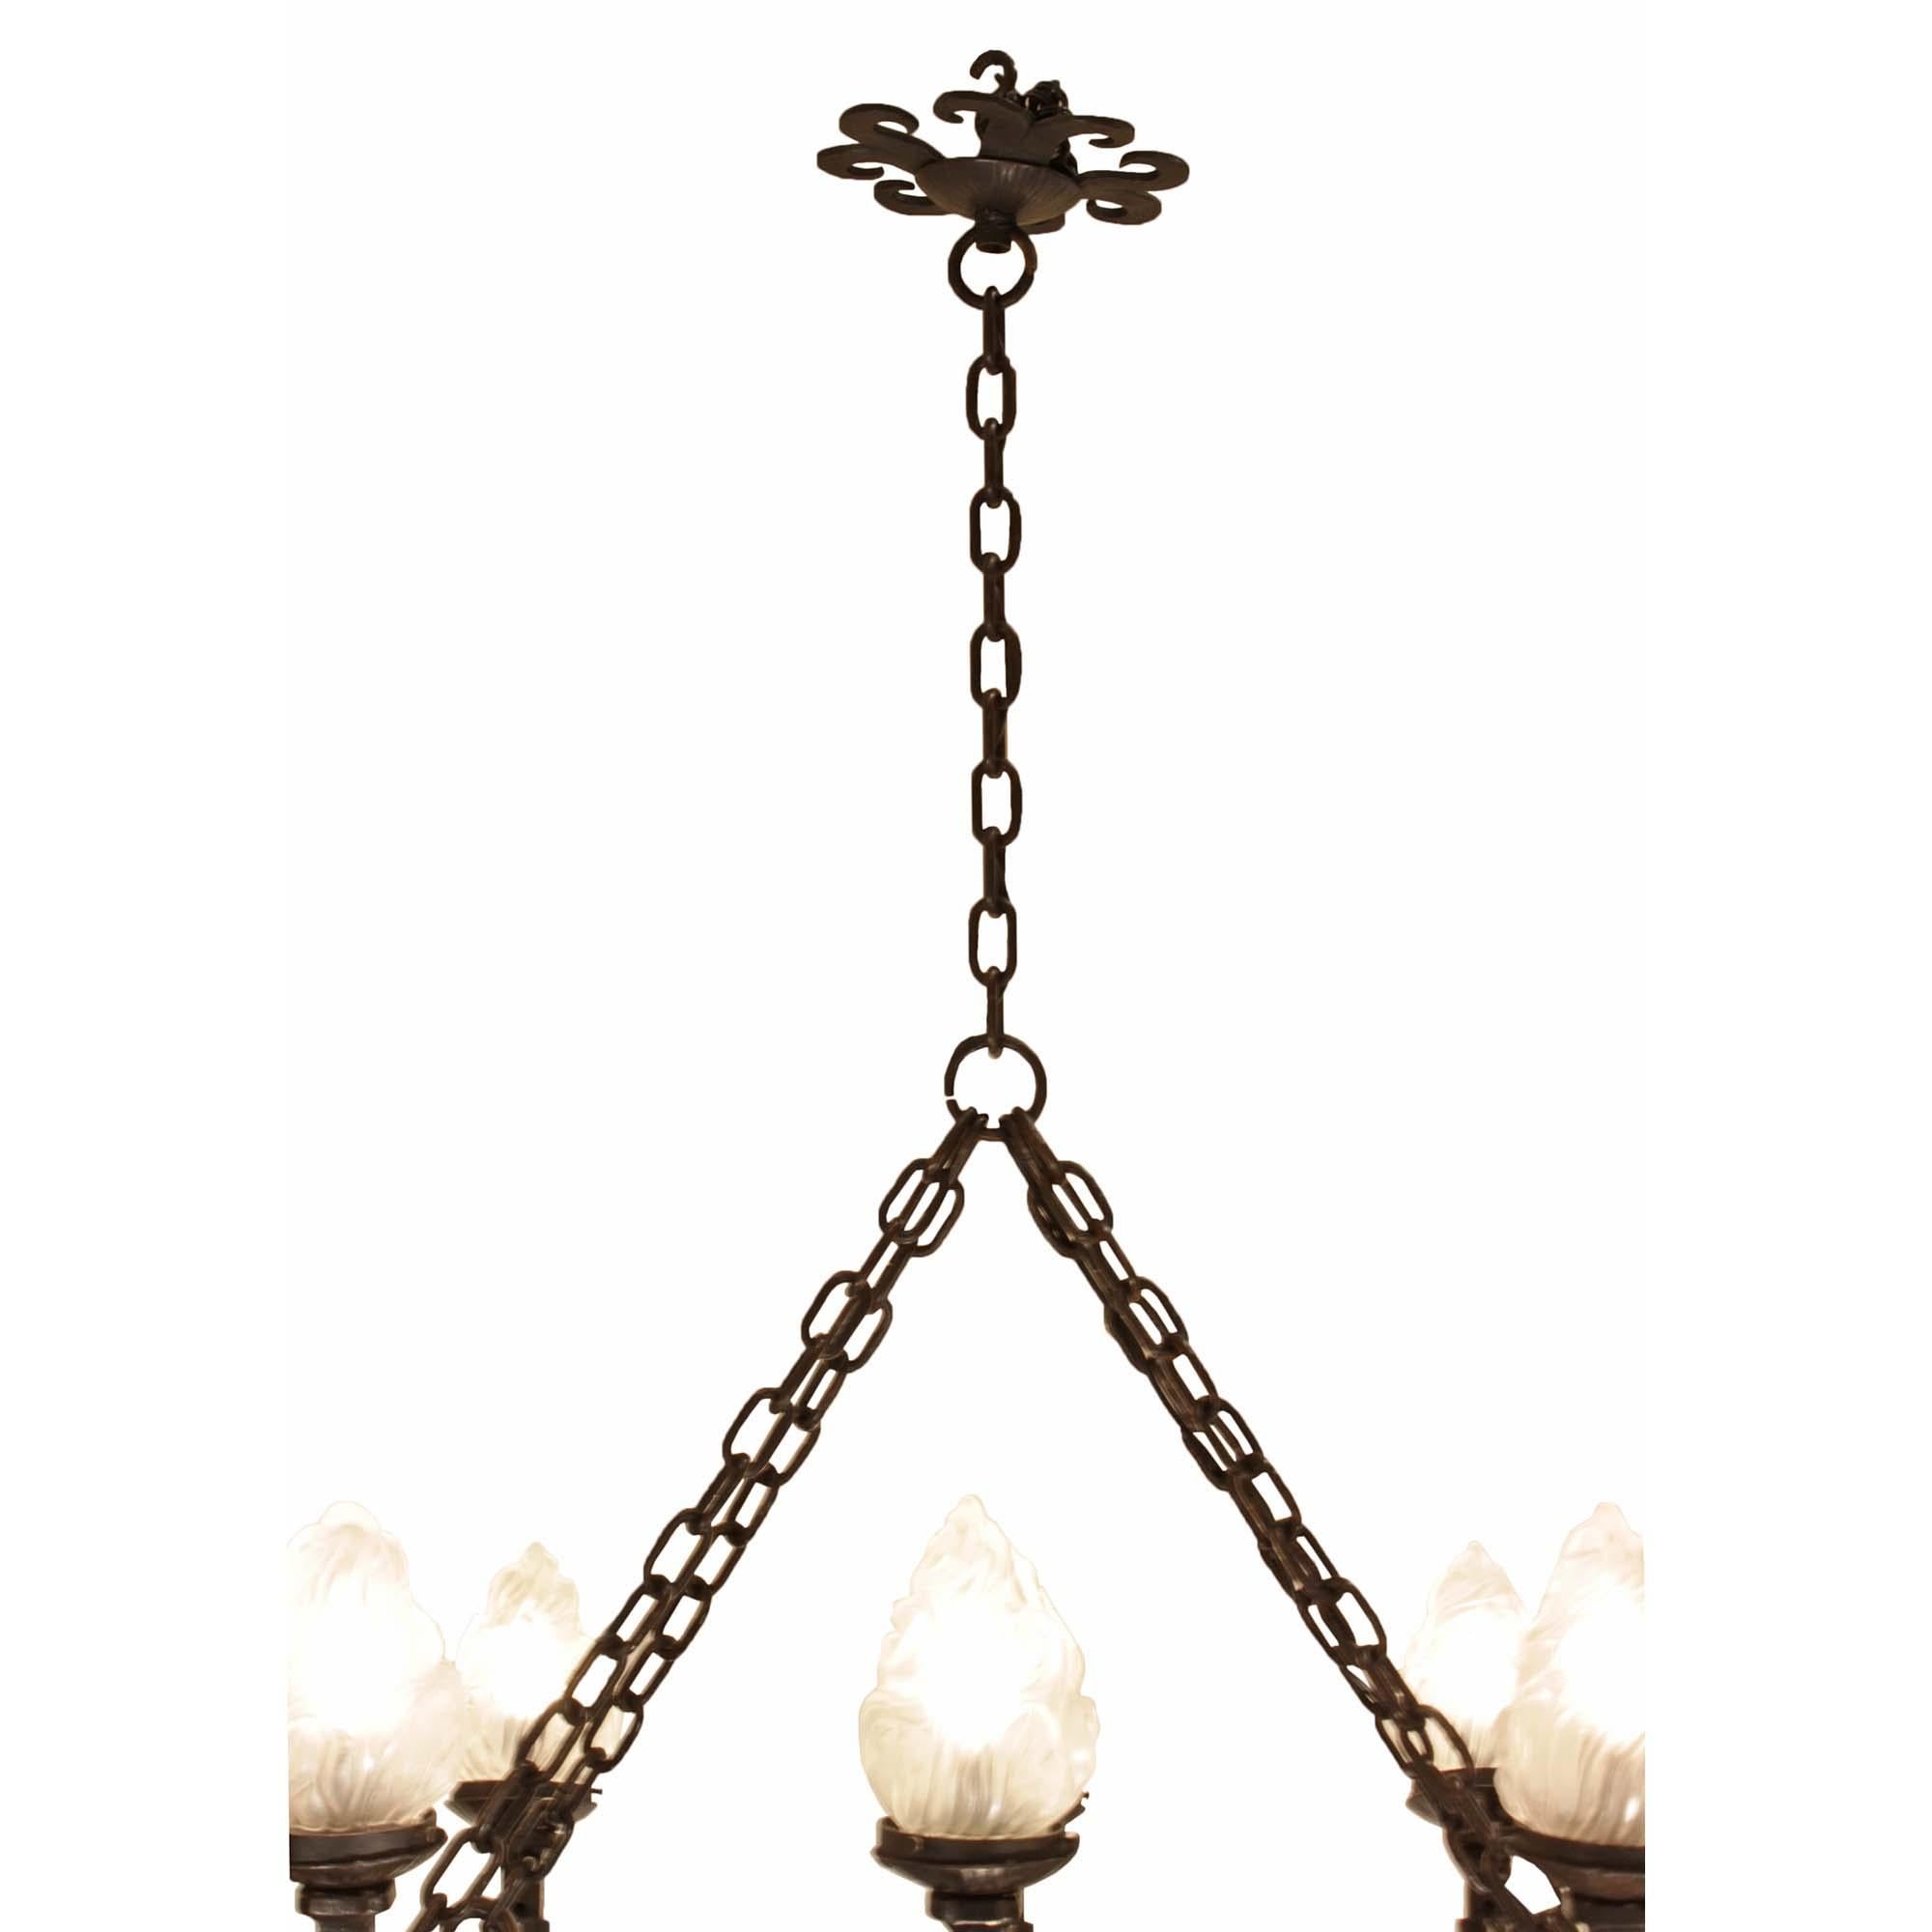 A very attractive French turn of the century wrought iron ten-light chandelier. The chandelier has an oval wrought iron base with scrolled arms that hold a twisted wrought iron flame designed light with frosted cover. The chandelier is joined to the